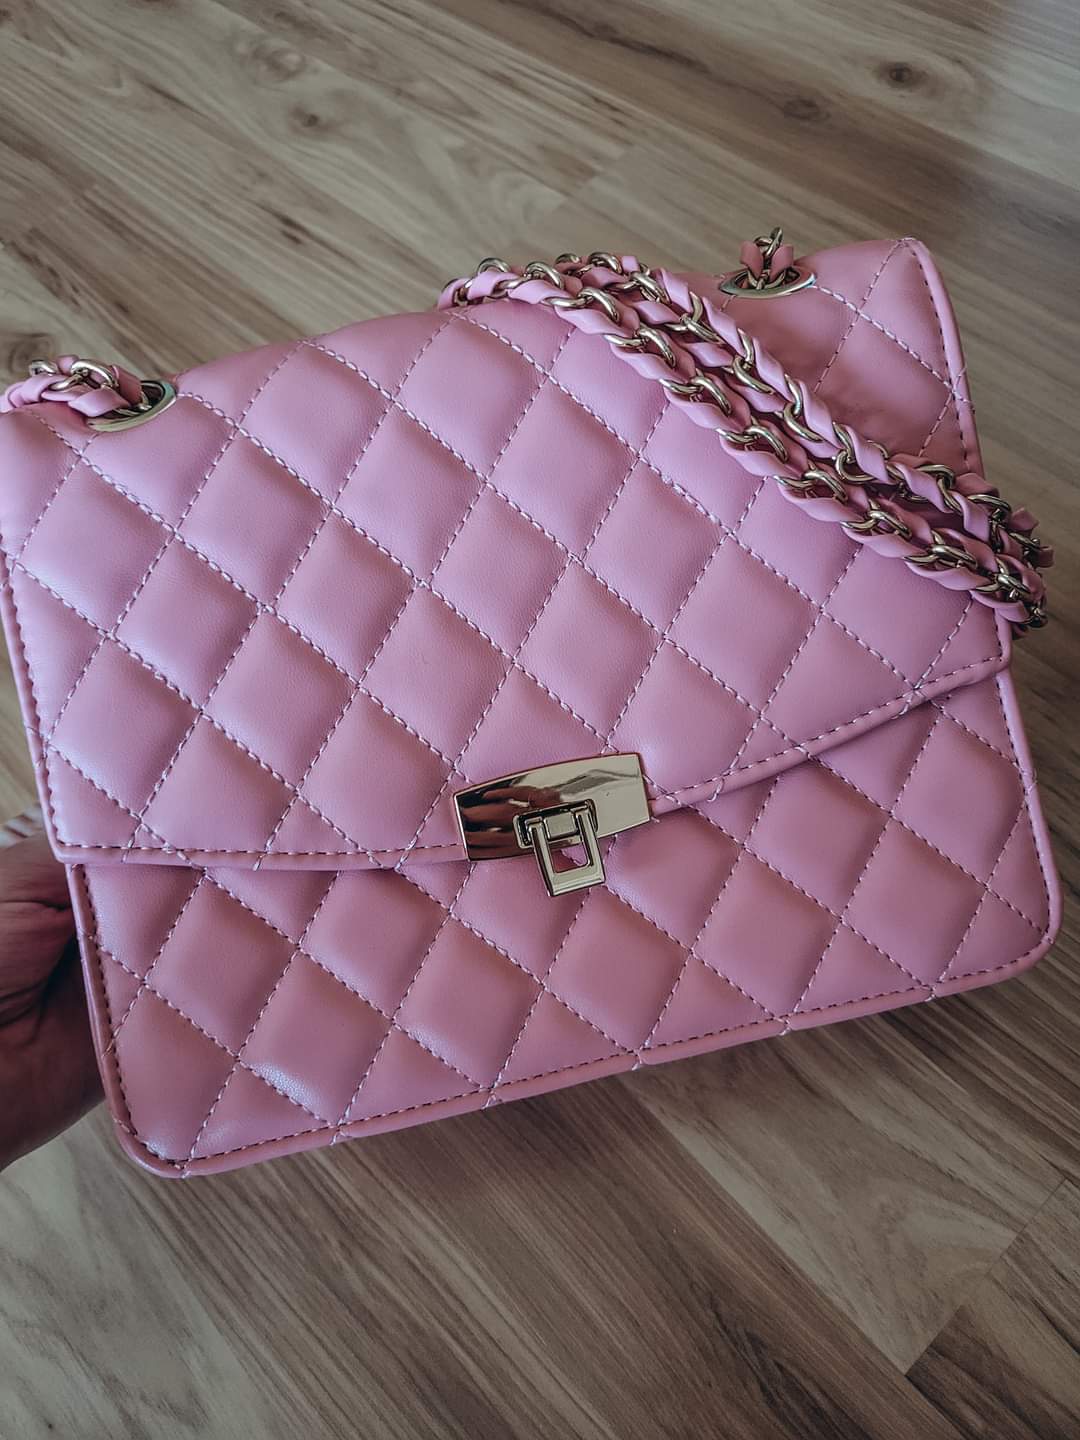 Pink quilted purse with pink and gold chain strap. 